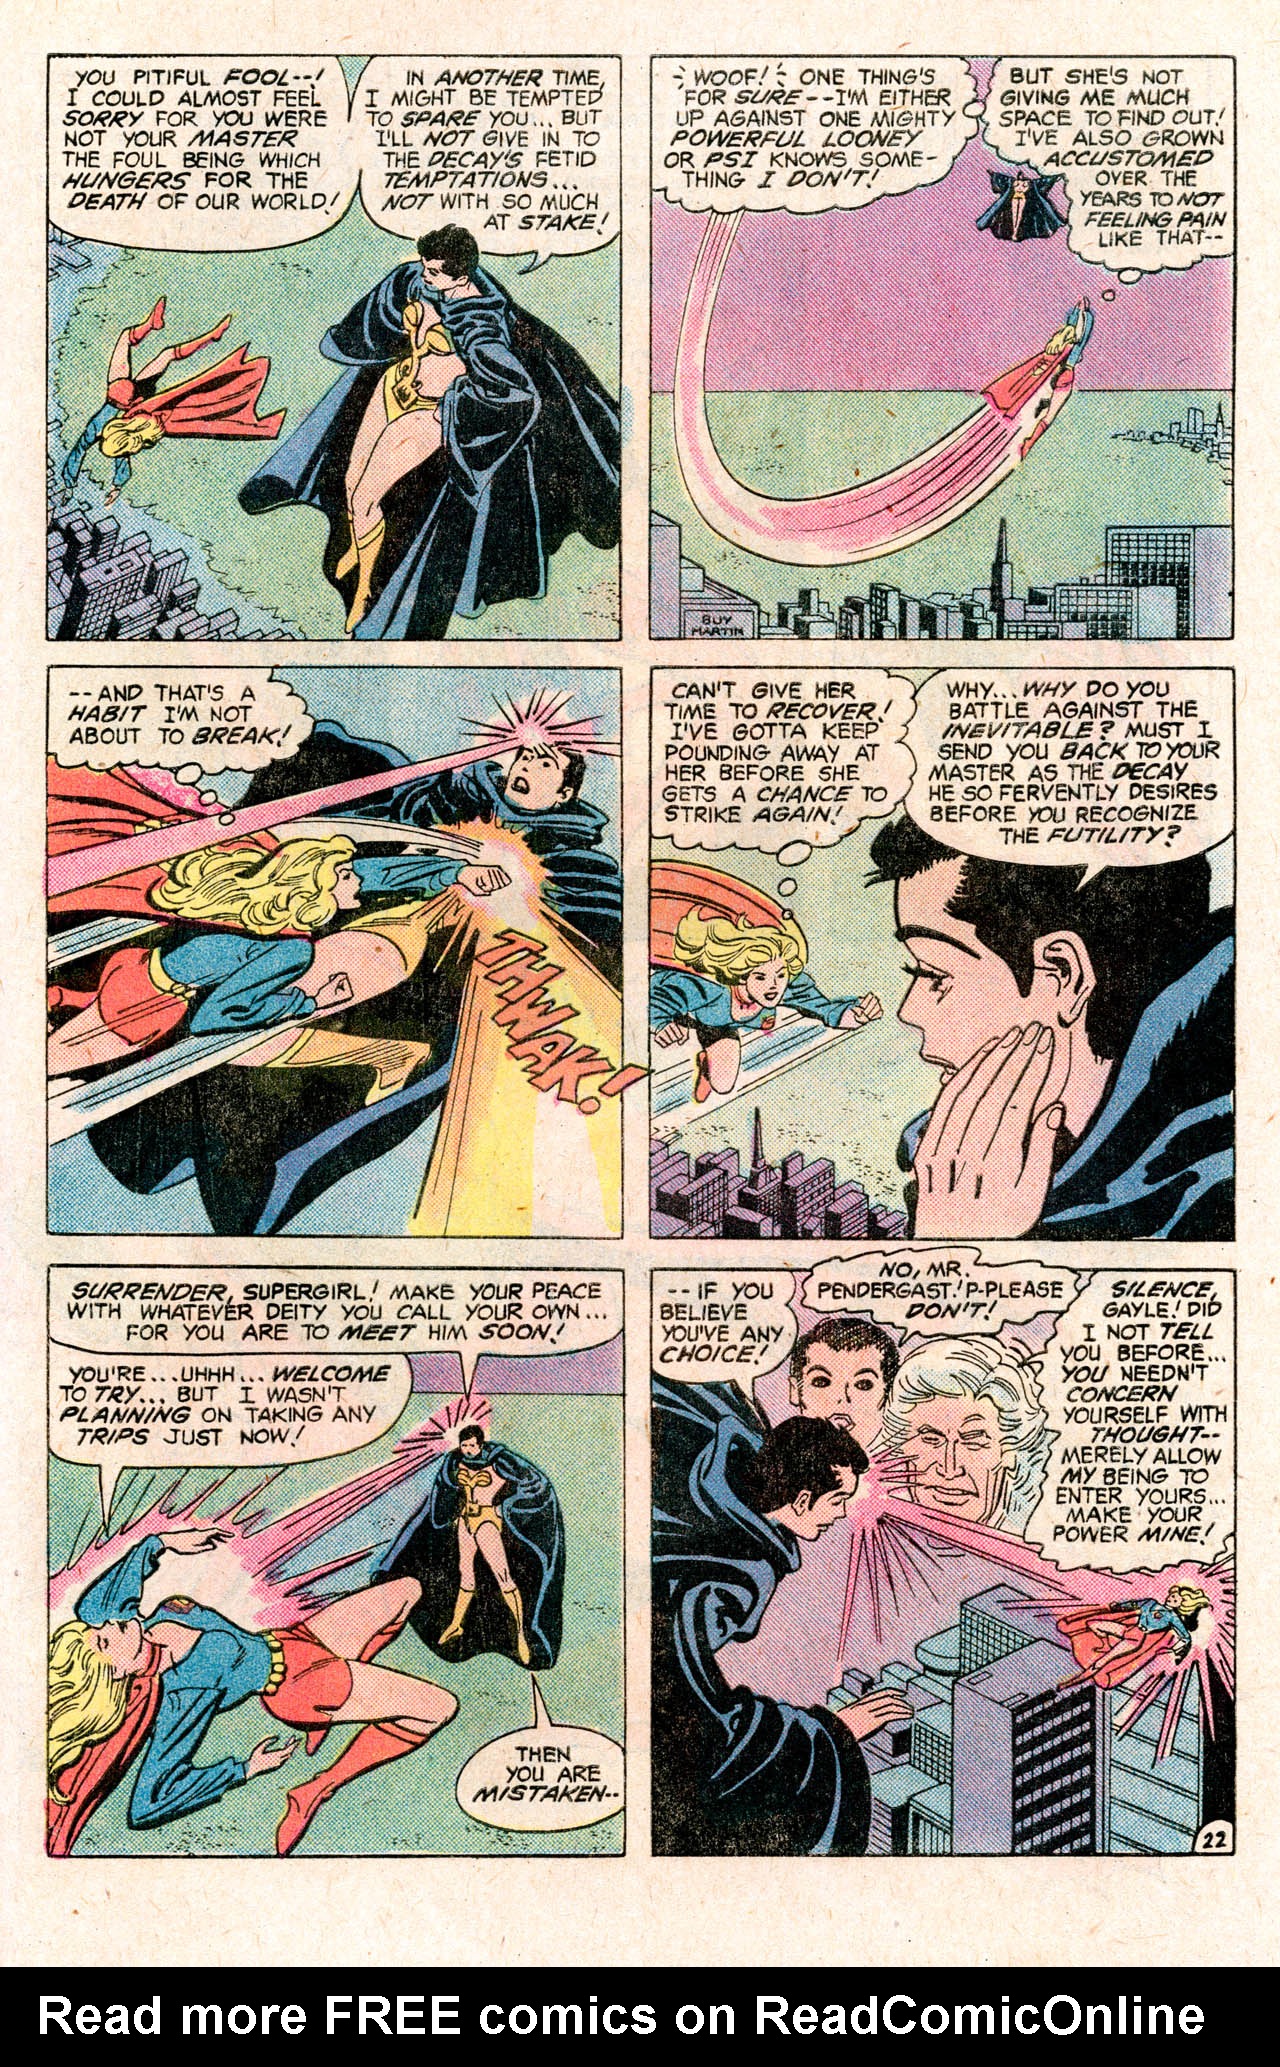 Supergirl (1982) 1 Page 46